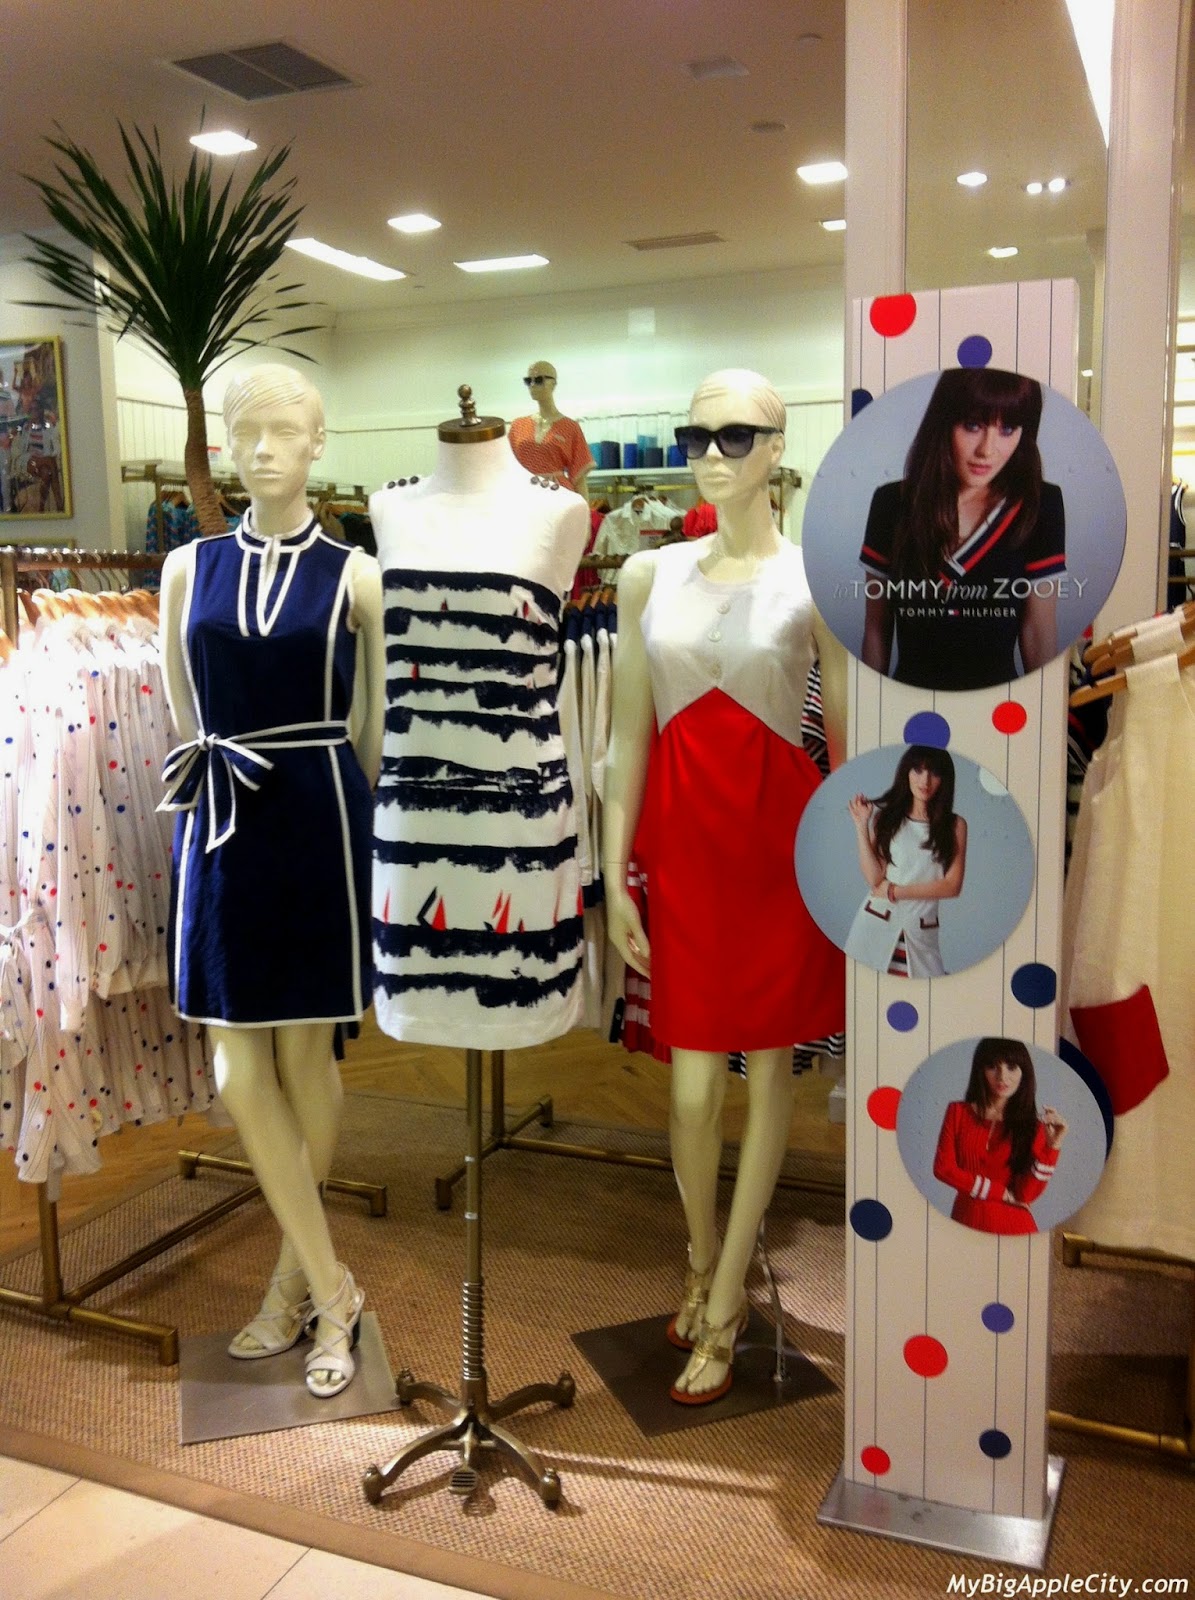 macys-zooey-hilfiger-collection-nyc